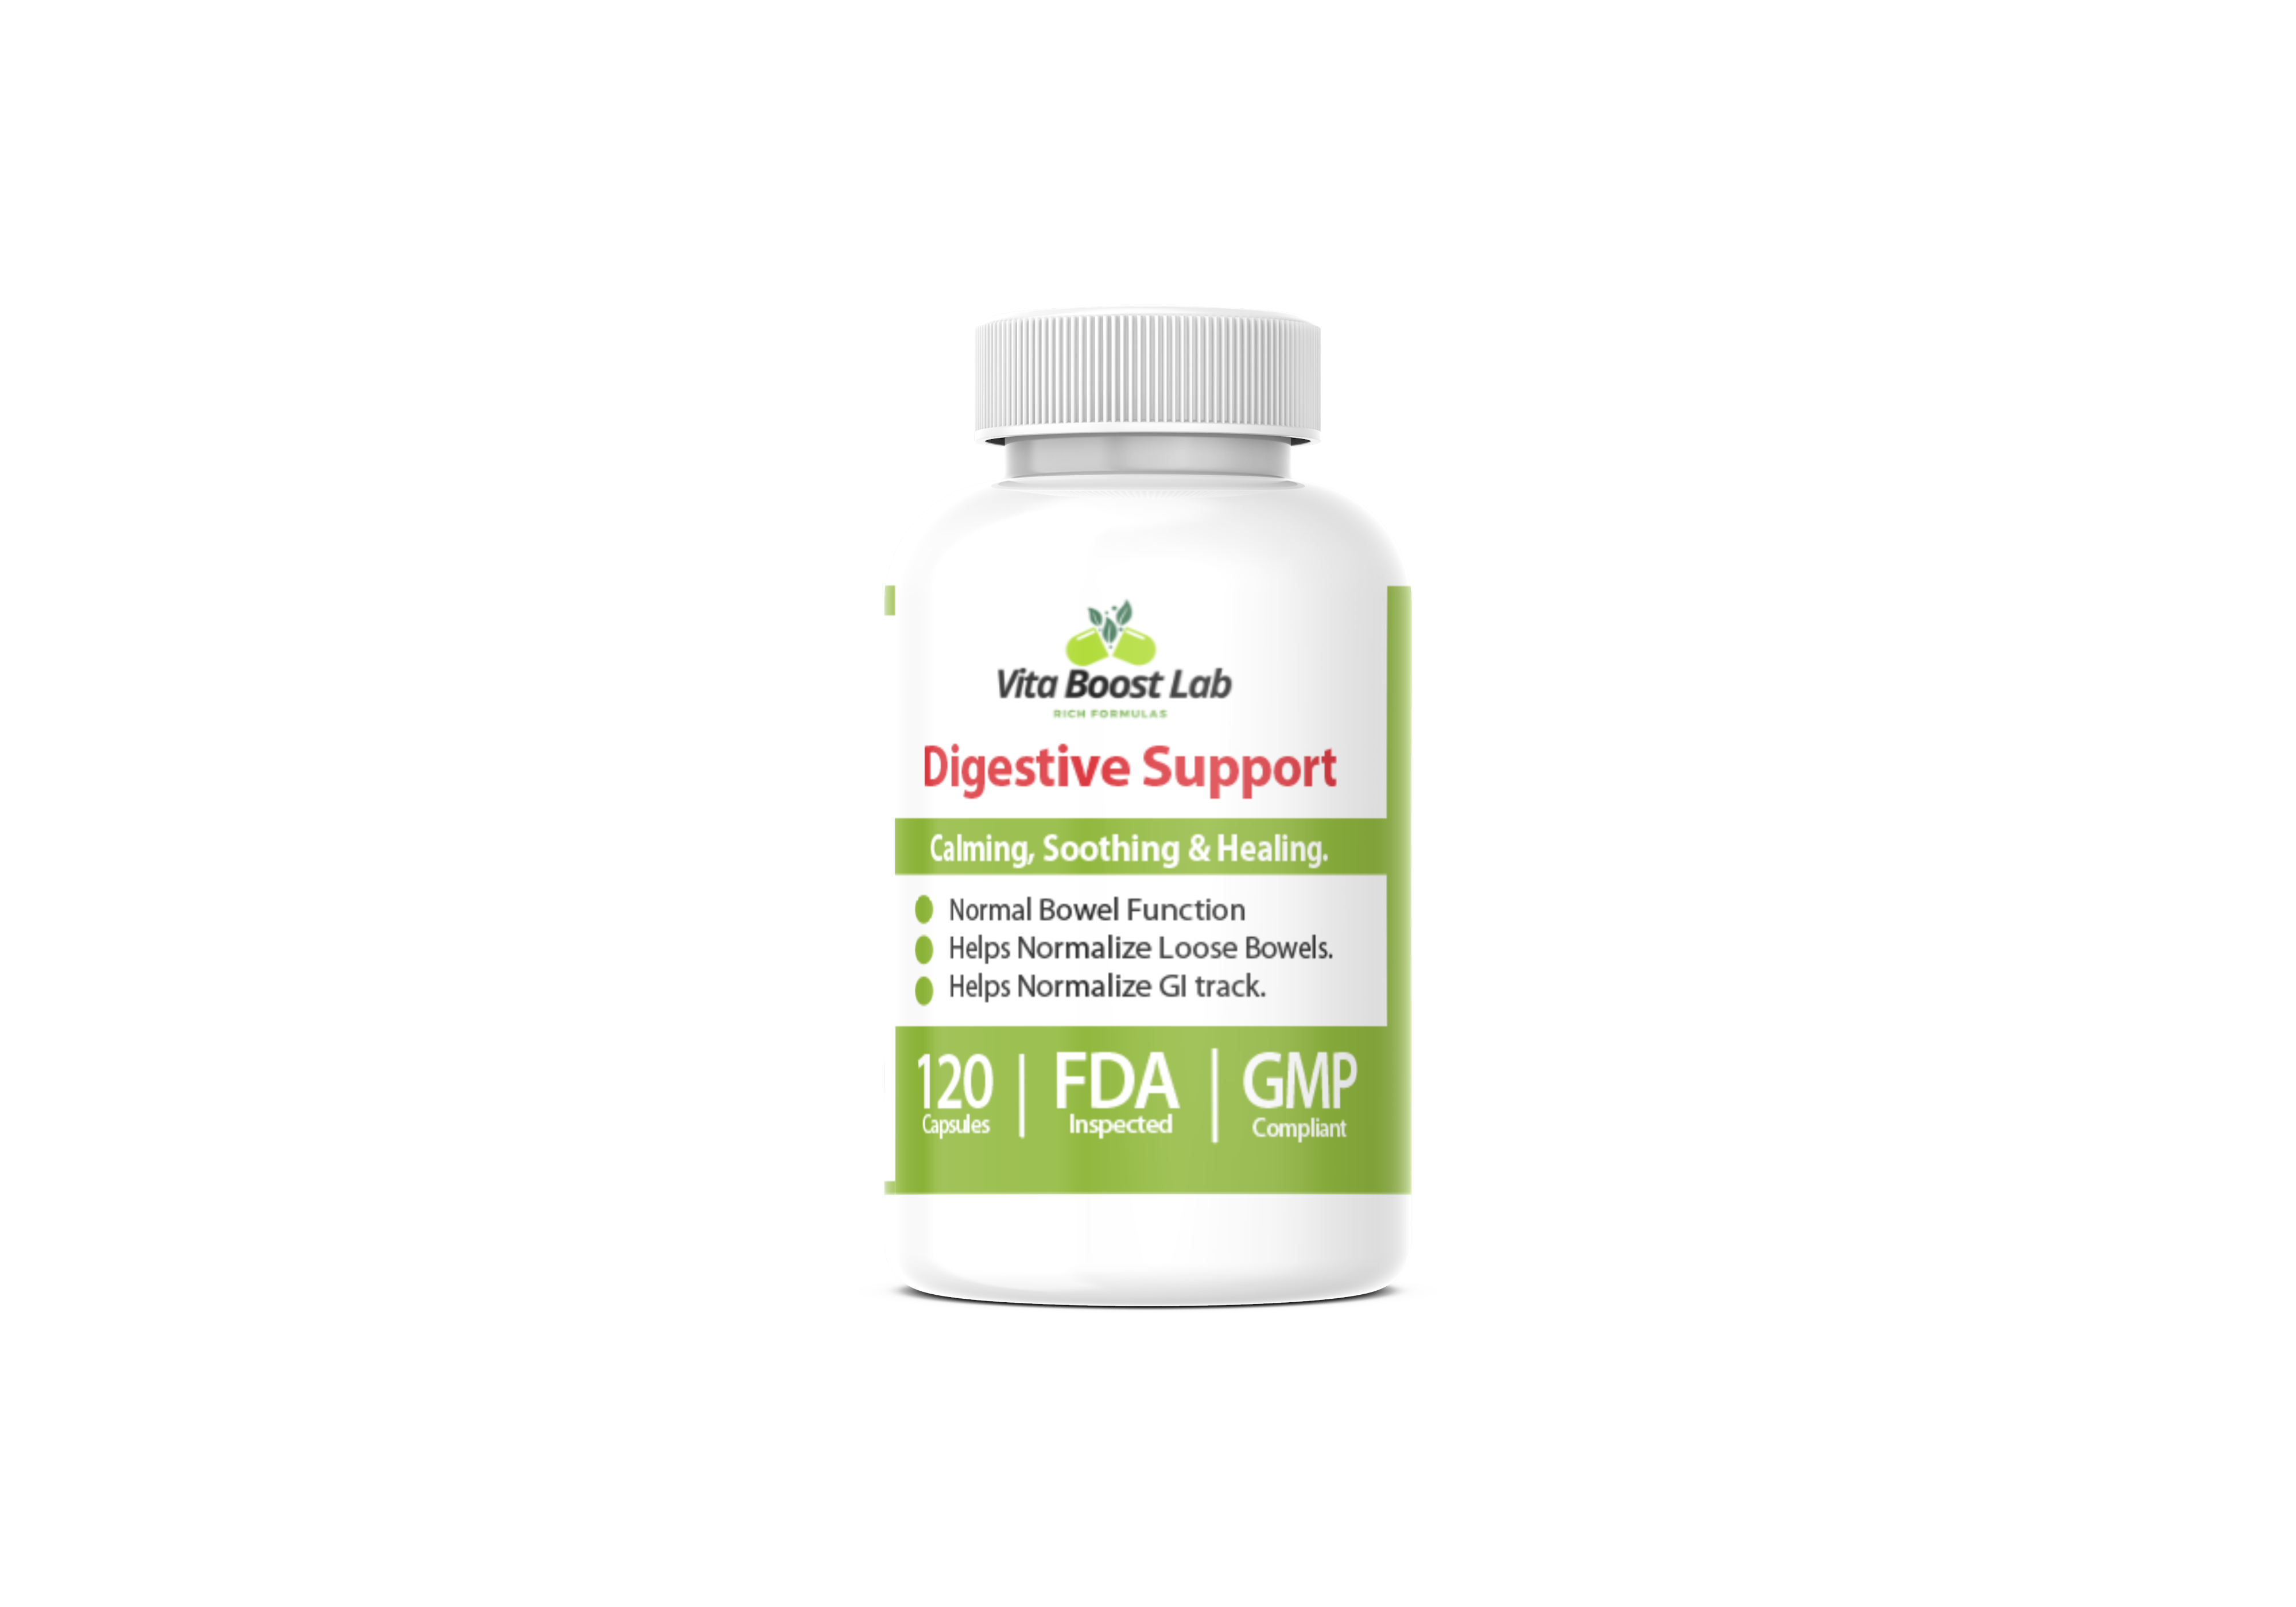 Digestive Support, Candida Cleanse, GI track. Support 120 Capsules